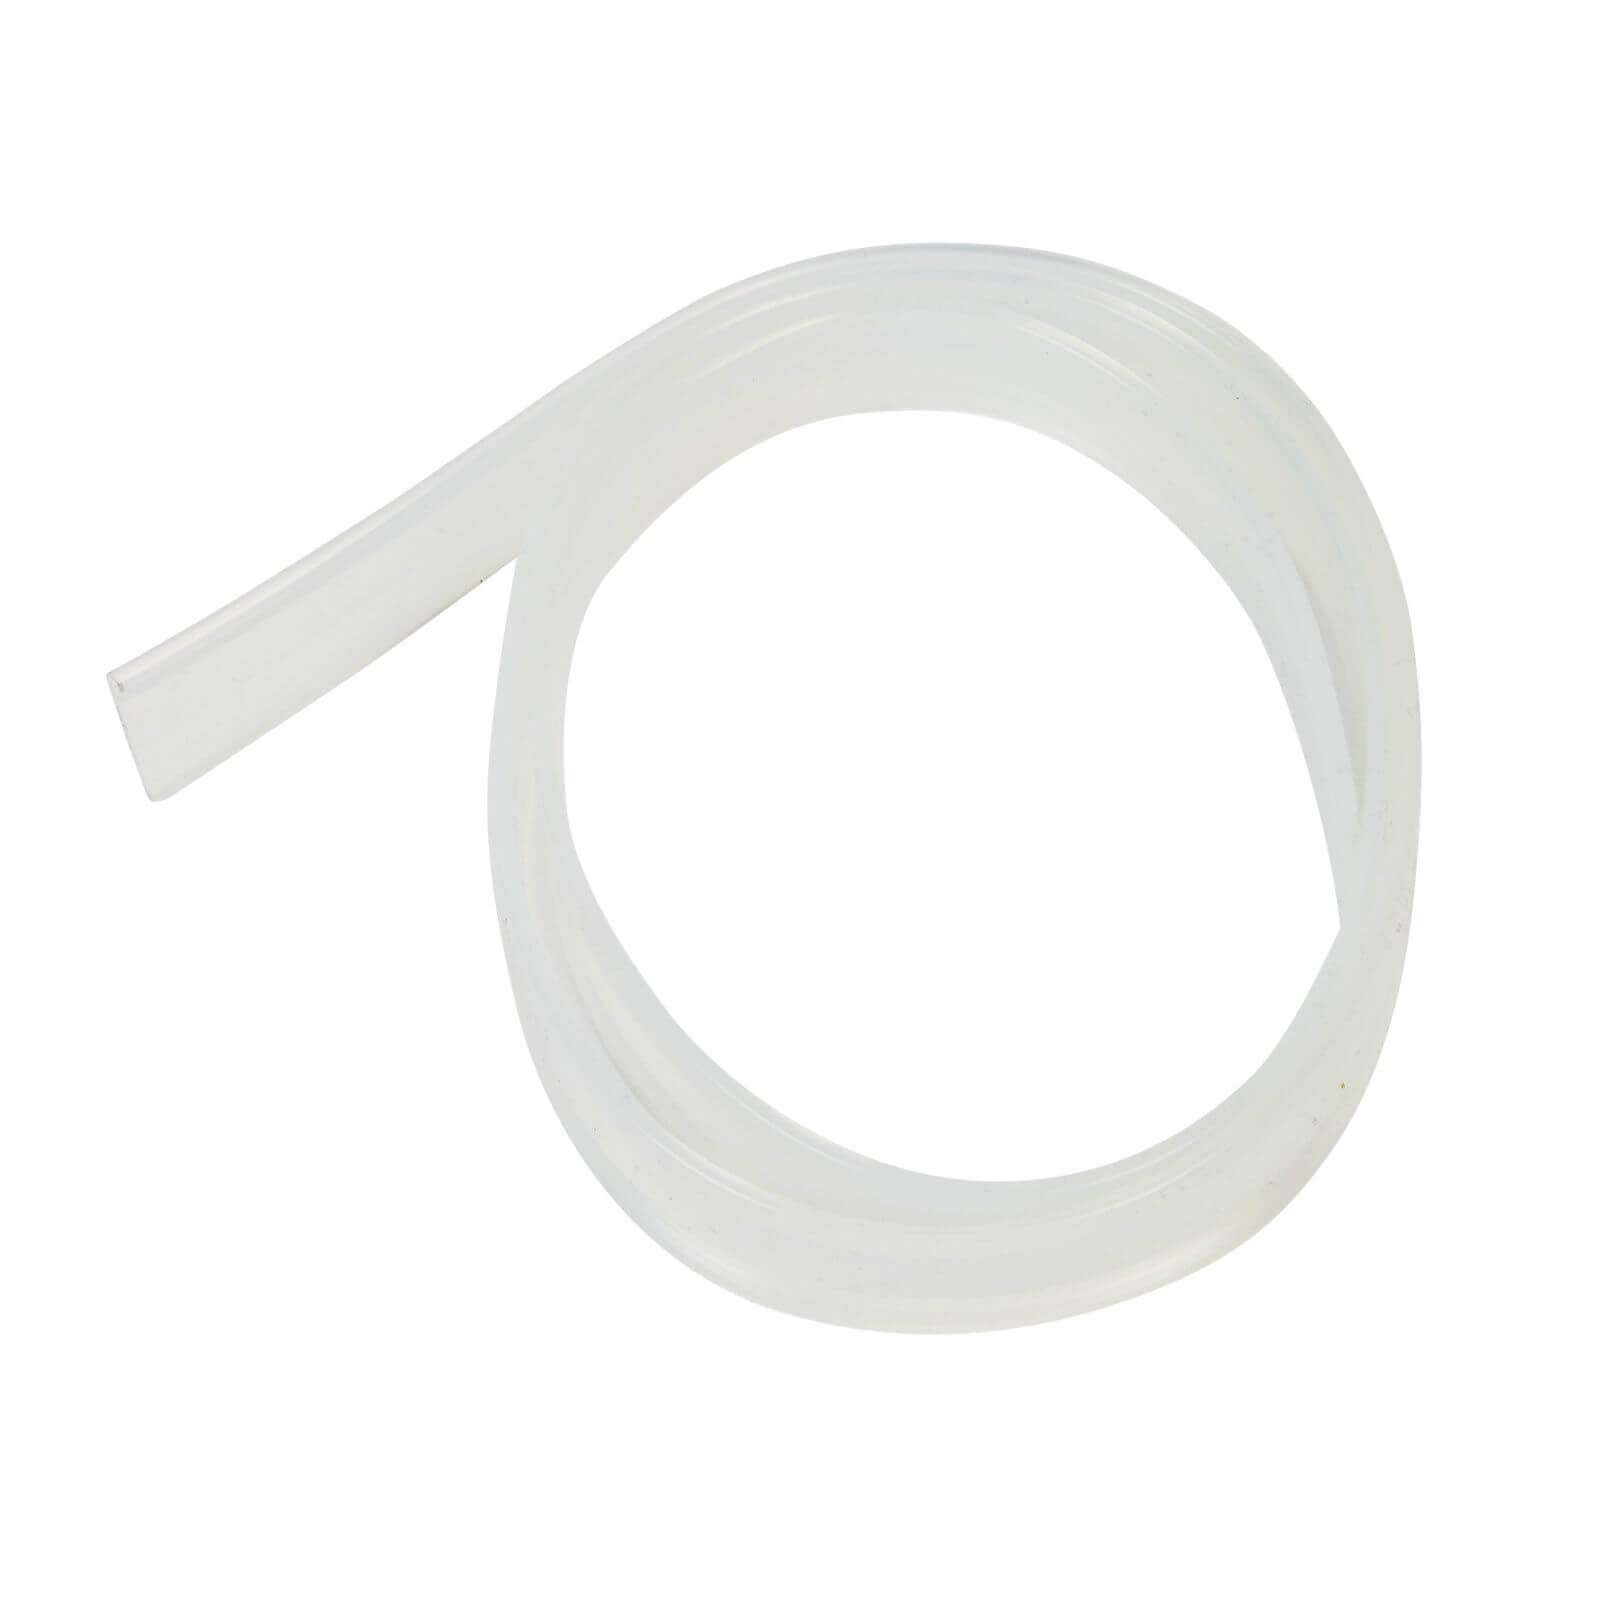 Croydex Replacement Shower Screen Seal 8-18mm